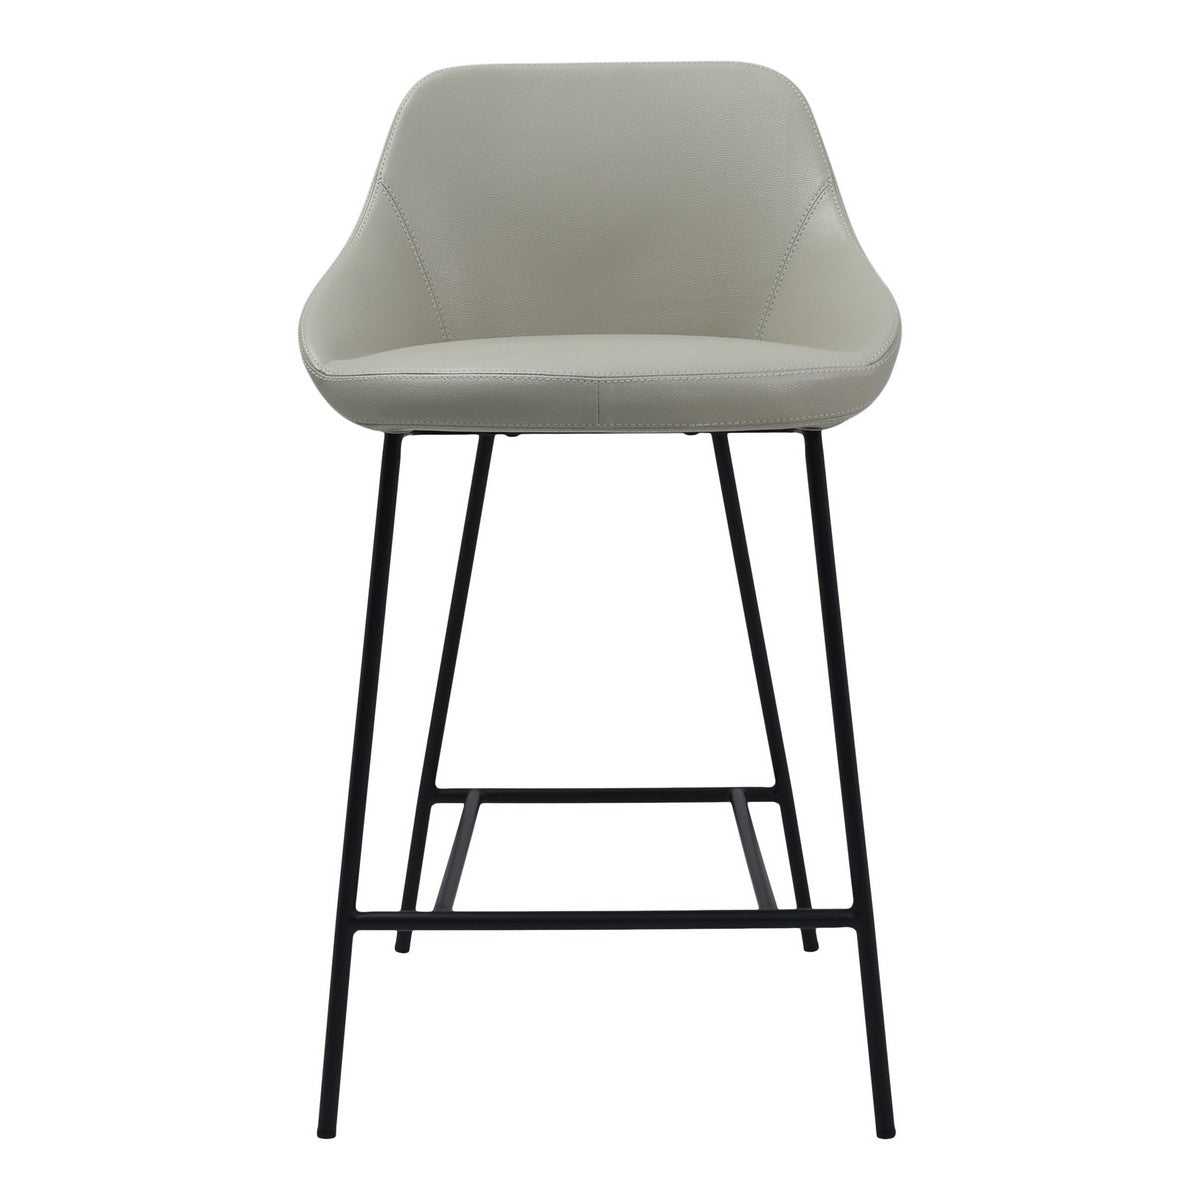 Moe's Home Collection Shelby Counter Stool Beige - EJ-1038-34 - Moe's Home Collection - Counter Stools - Minimal And Modern - 1